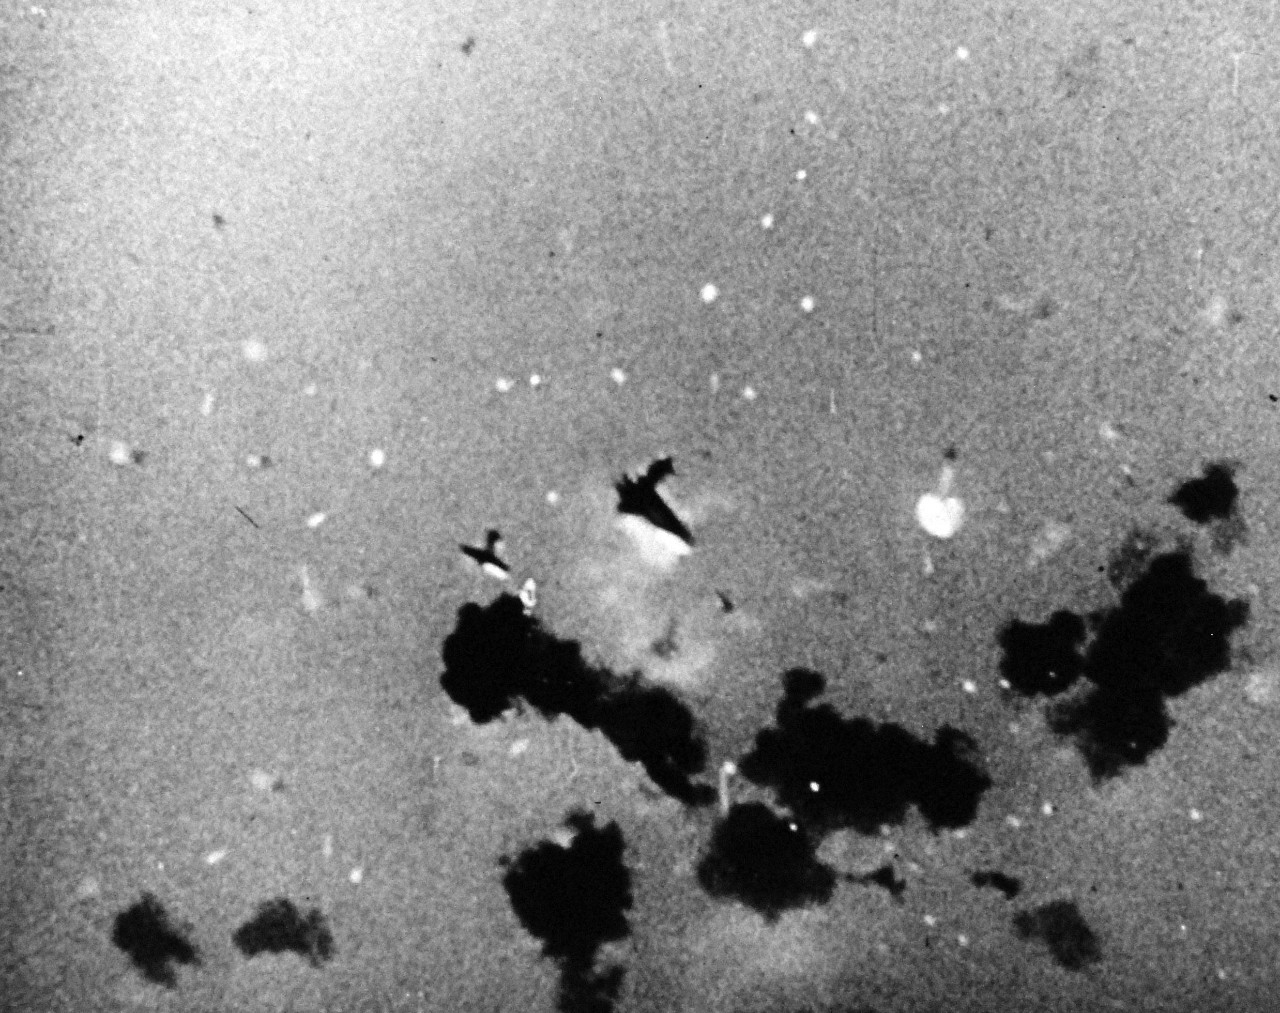 80-G-49873: Japanese Kamikaze Attack, July 1945. Stills from the U.S. Navy, Marines and Coast Guard film, “The Fleet That Come To Stay.”  Shown:  Disintegrating in mid-air after being hit by USN anti-aircraft fire.  A Japanese Kamikaze flutters to the sea.   Received July 18, 1945.   Official U.S. Navy photograph, now in the collections of the National Archives.  